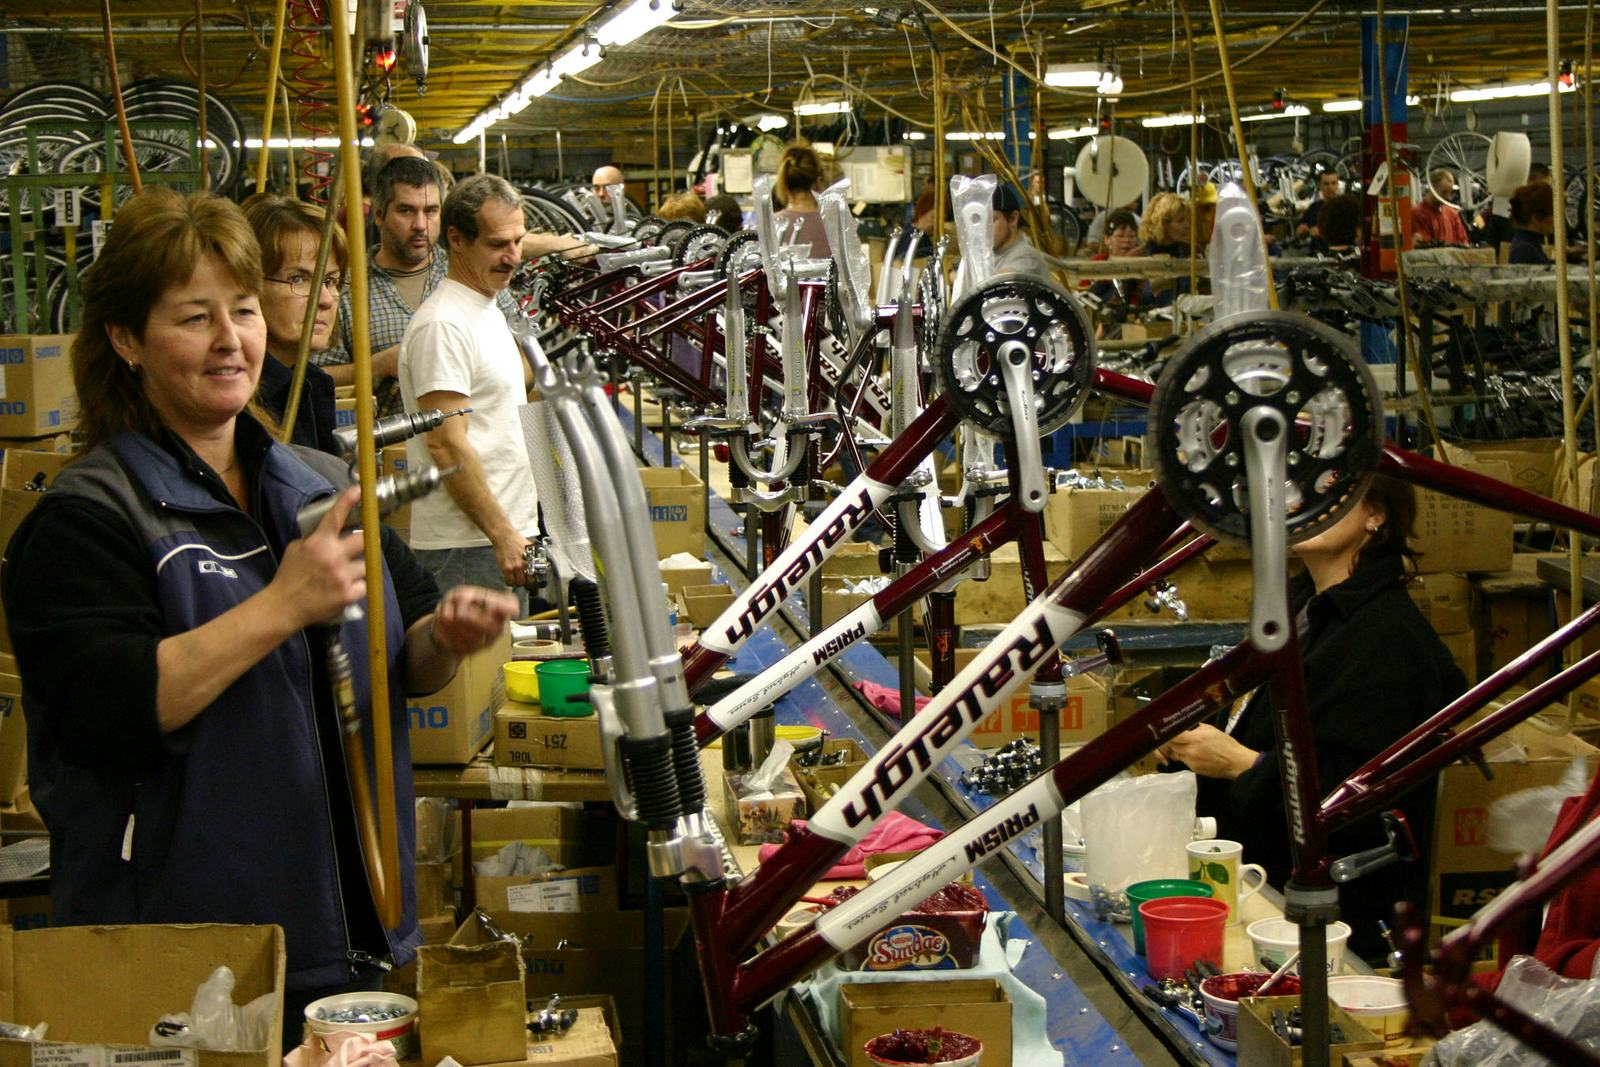 Raleigh Canada was the largest bicycle manufacturer in North America. In 2007 the facility produced 320,00 bikes.